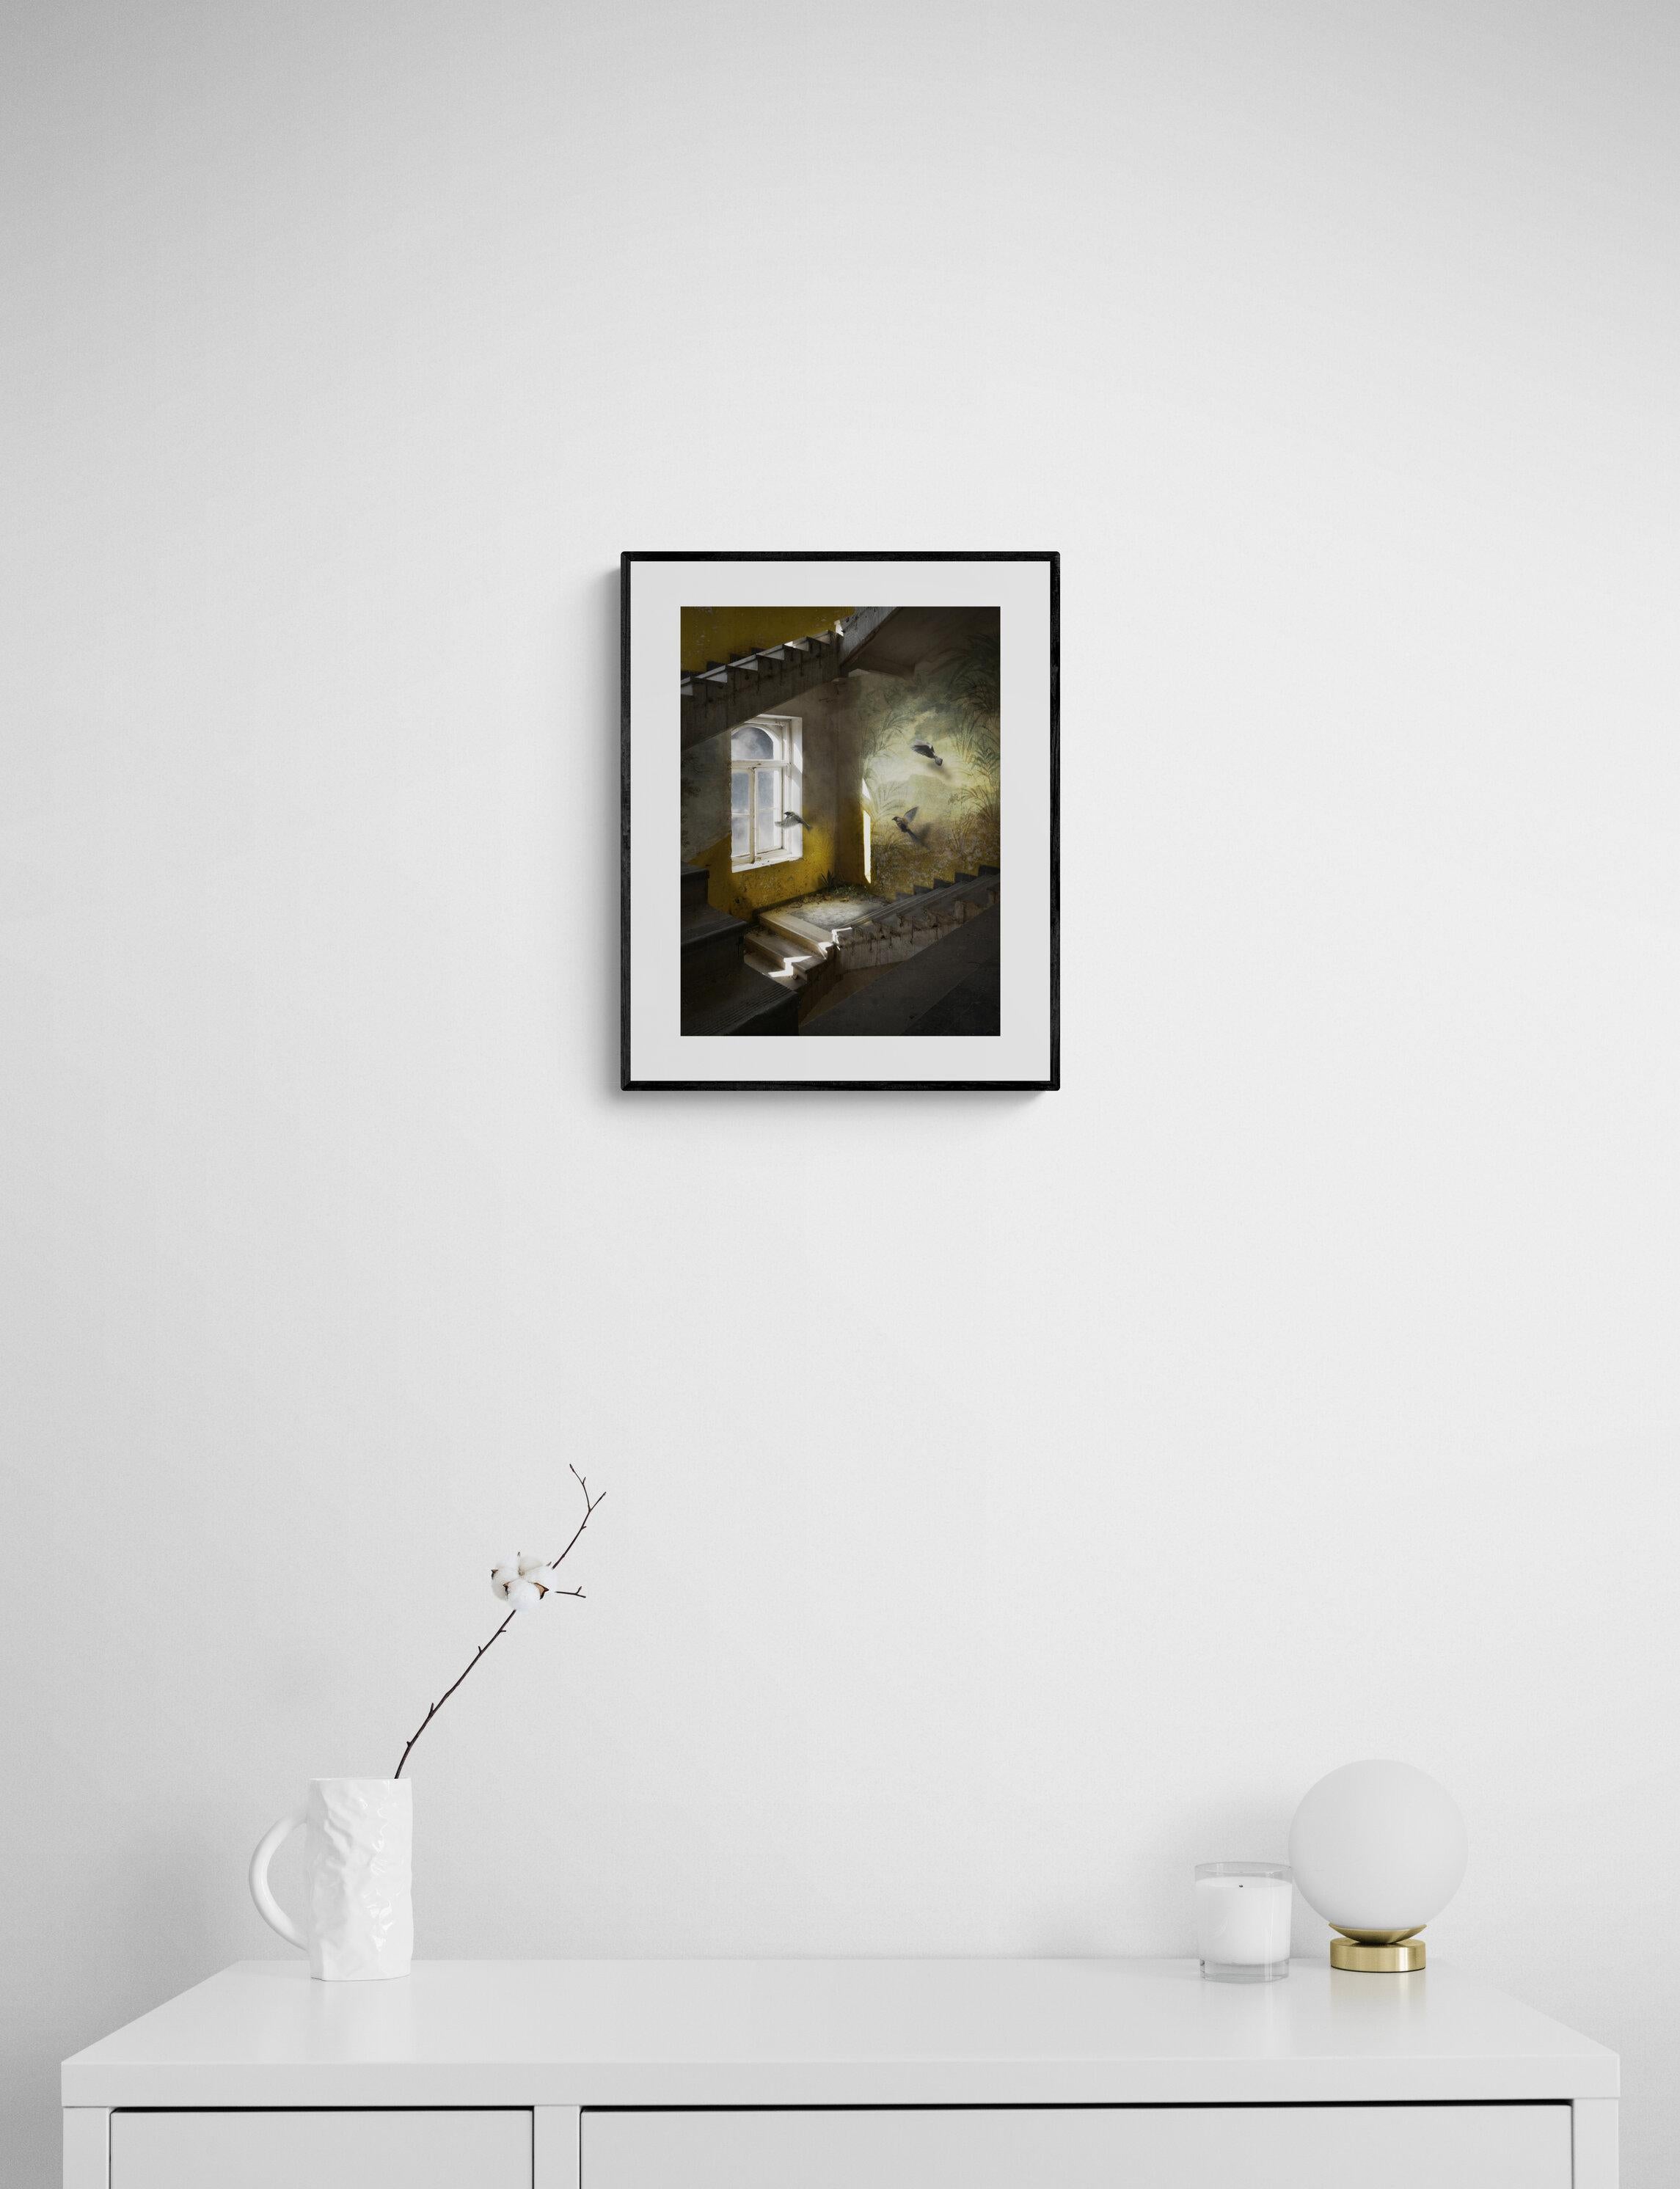 Mural - Archival Pigment Print, Limited Edition, Interior Photography, Birds - Black Interior Print by Suzanne Moxhay